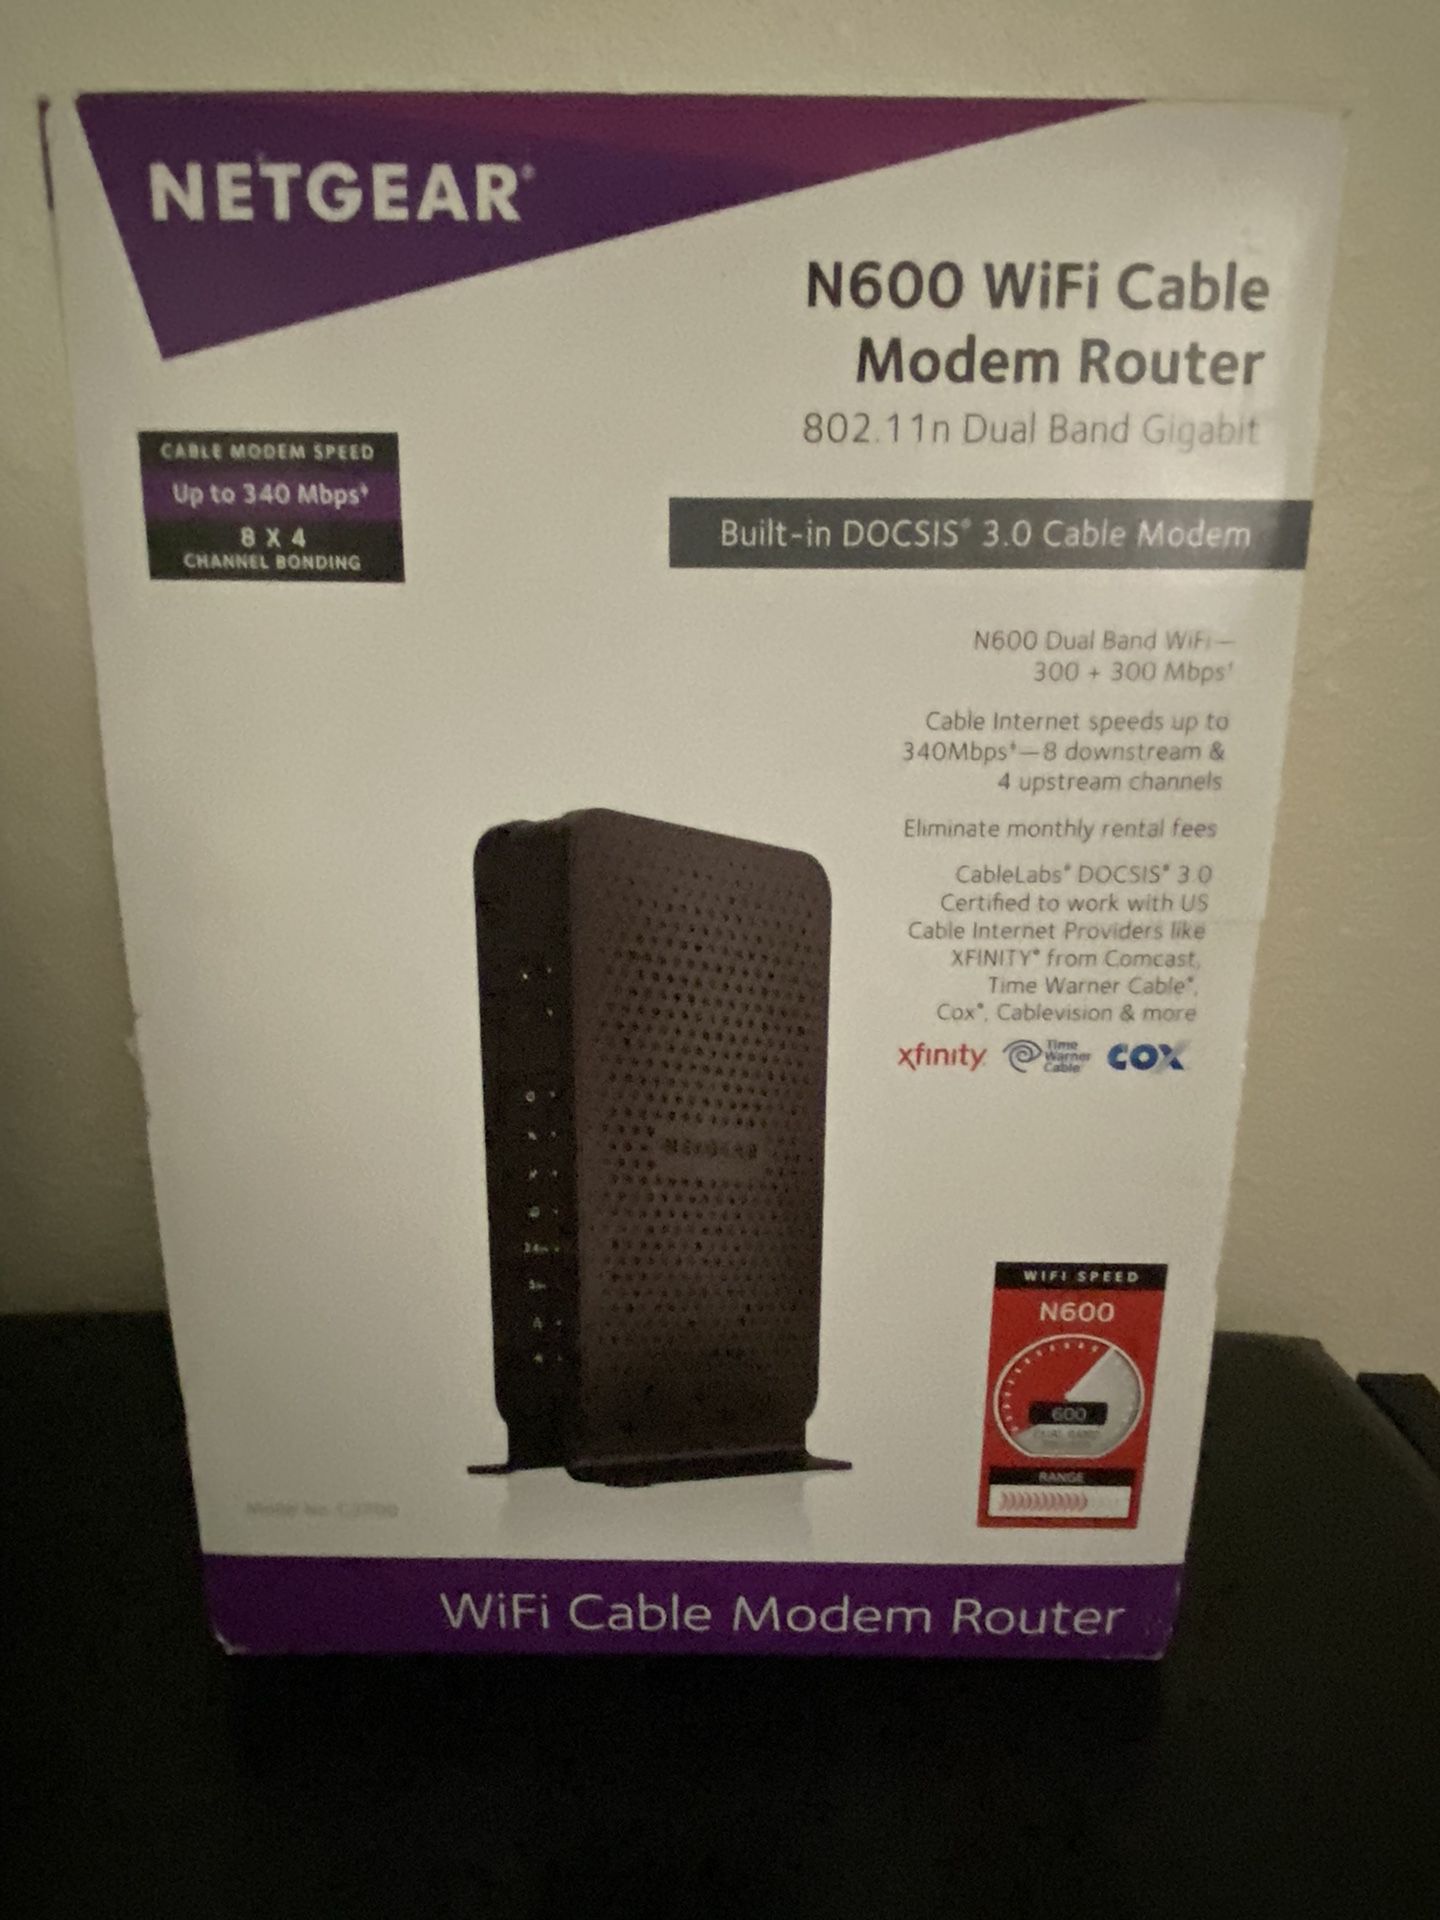 Netgear N600 Wi-Fi Cable Modem Router 